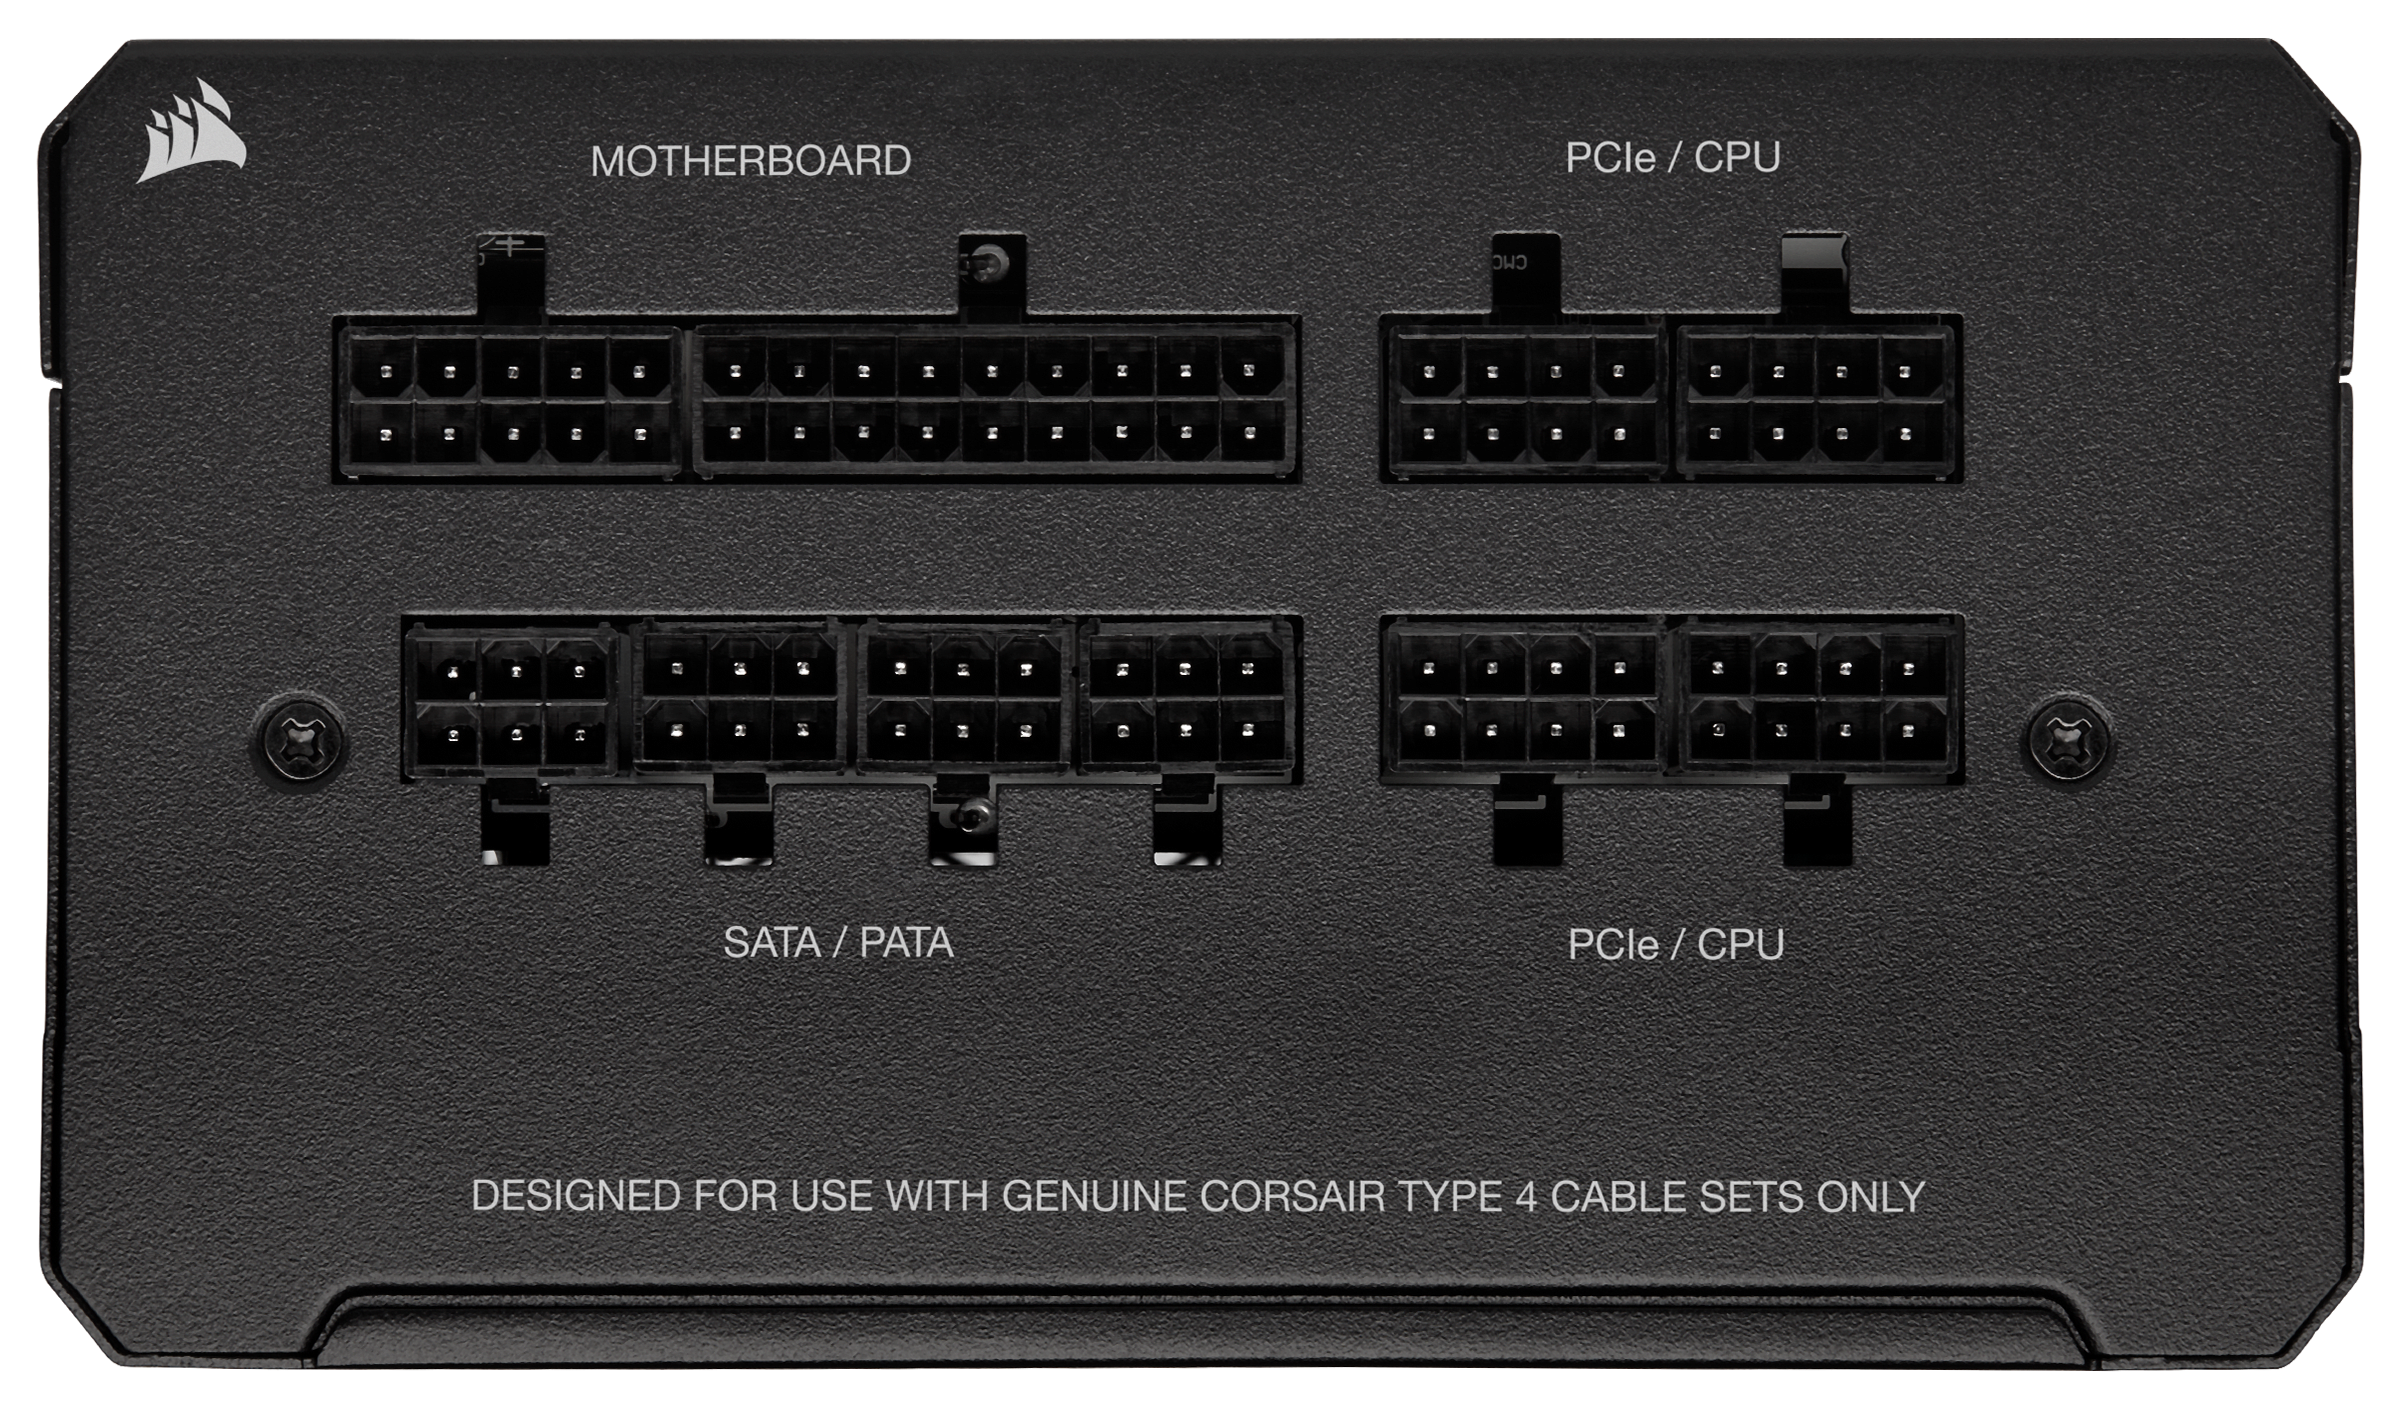 Corsair RMe Series 80 PLUS Gold Fully Modular Low-Noise Power Supply w/ATX  3.0 + PCIe 5.0 support - RM750e, RM850e